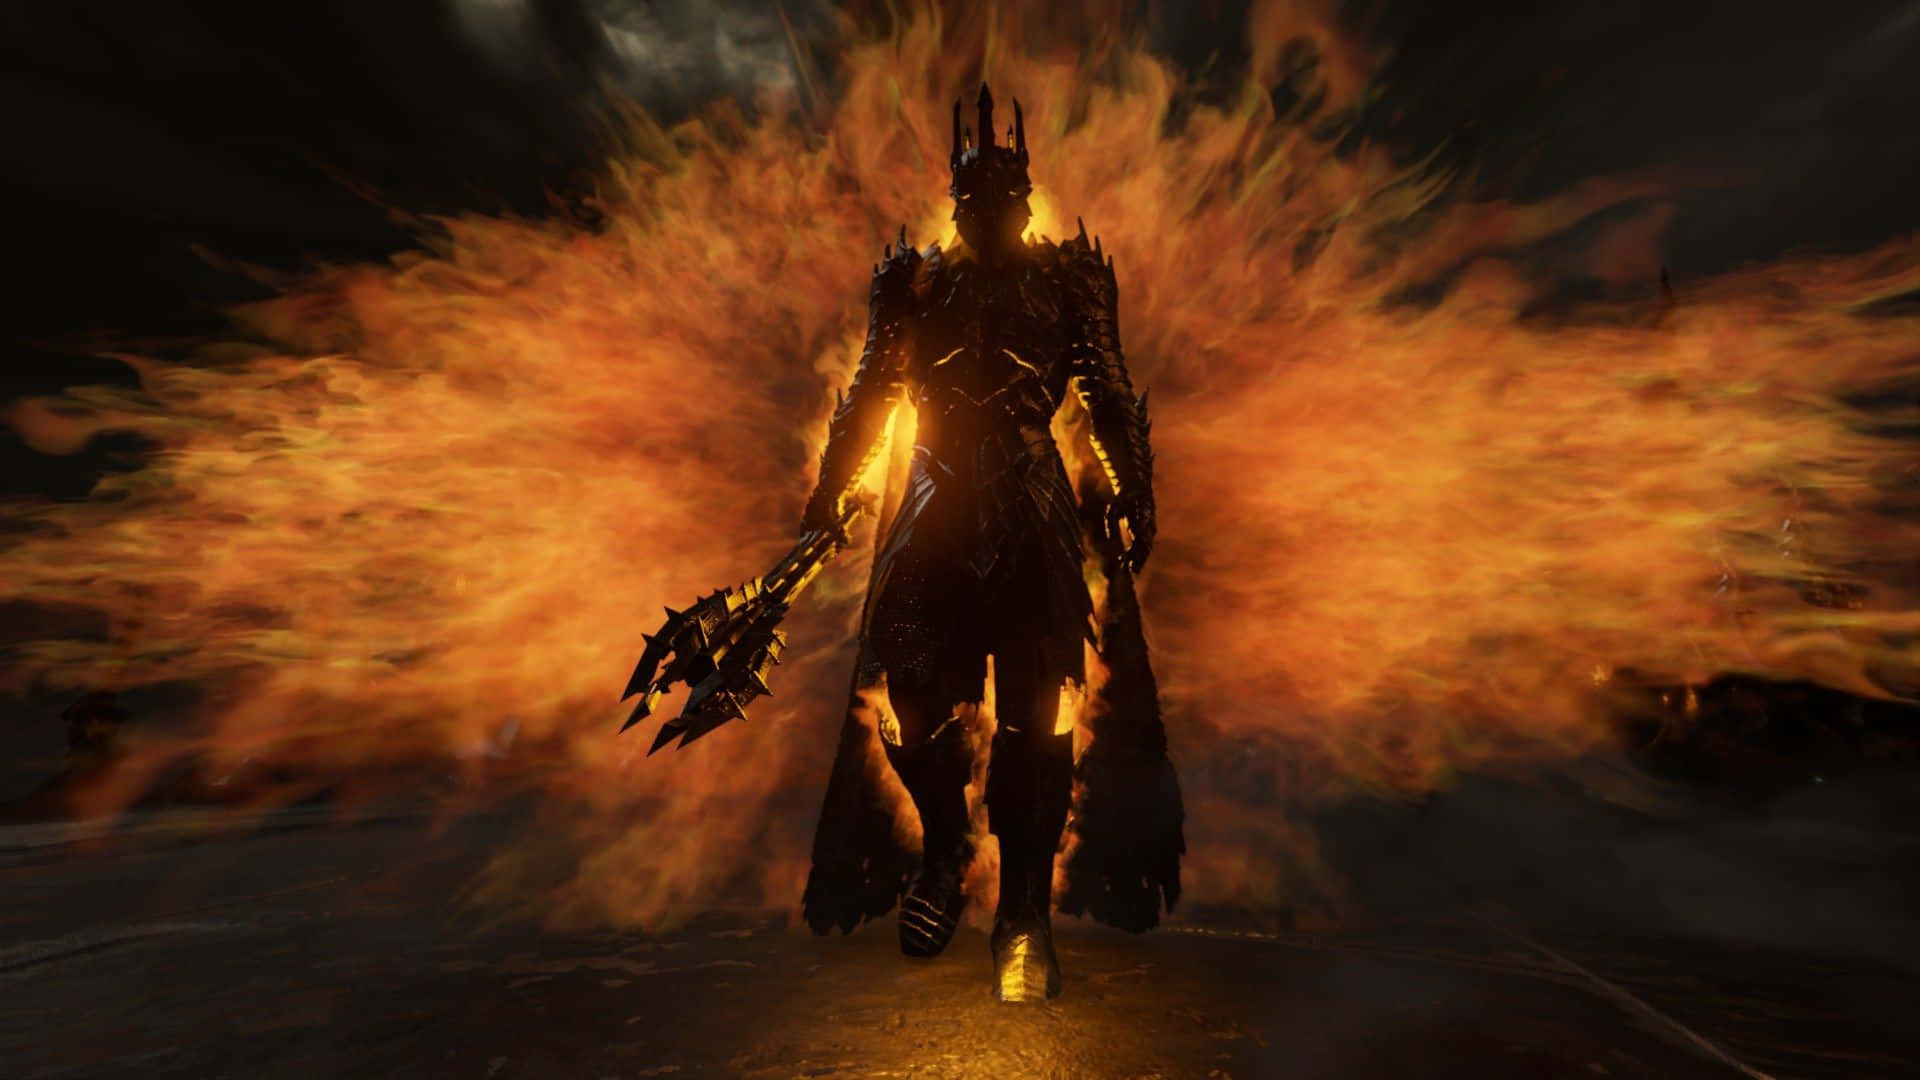 Best Shadow Of War Background Sauron With Firey Powers